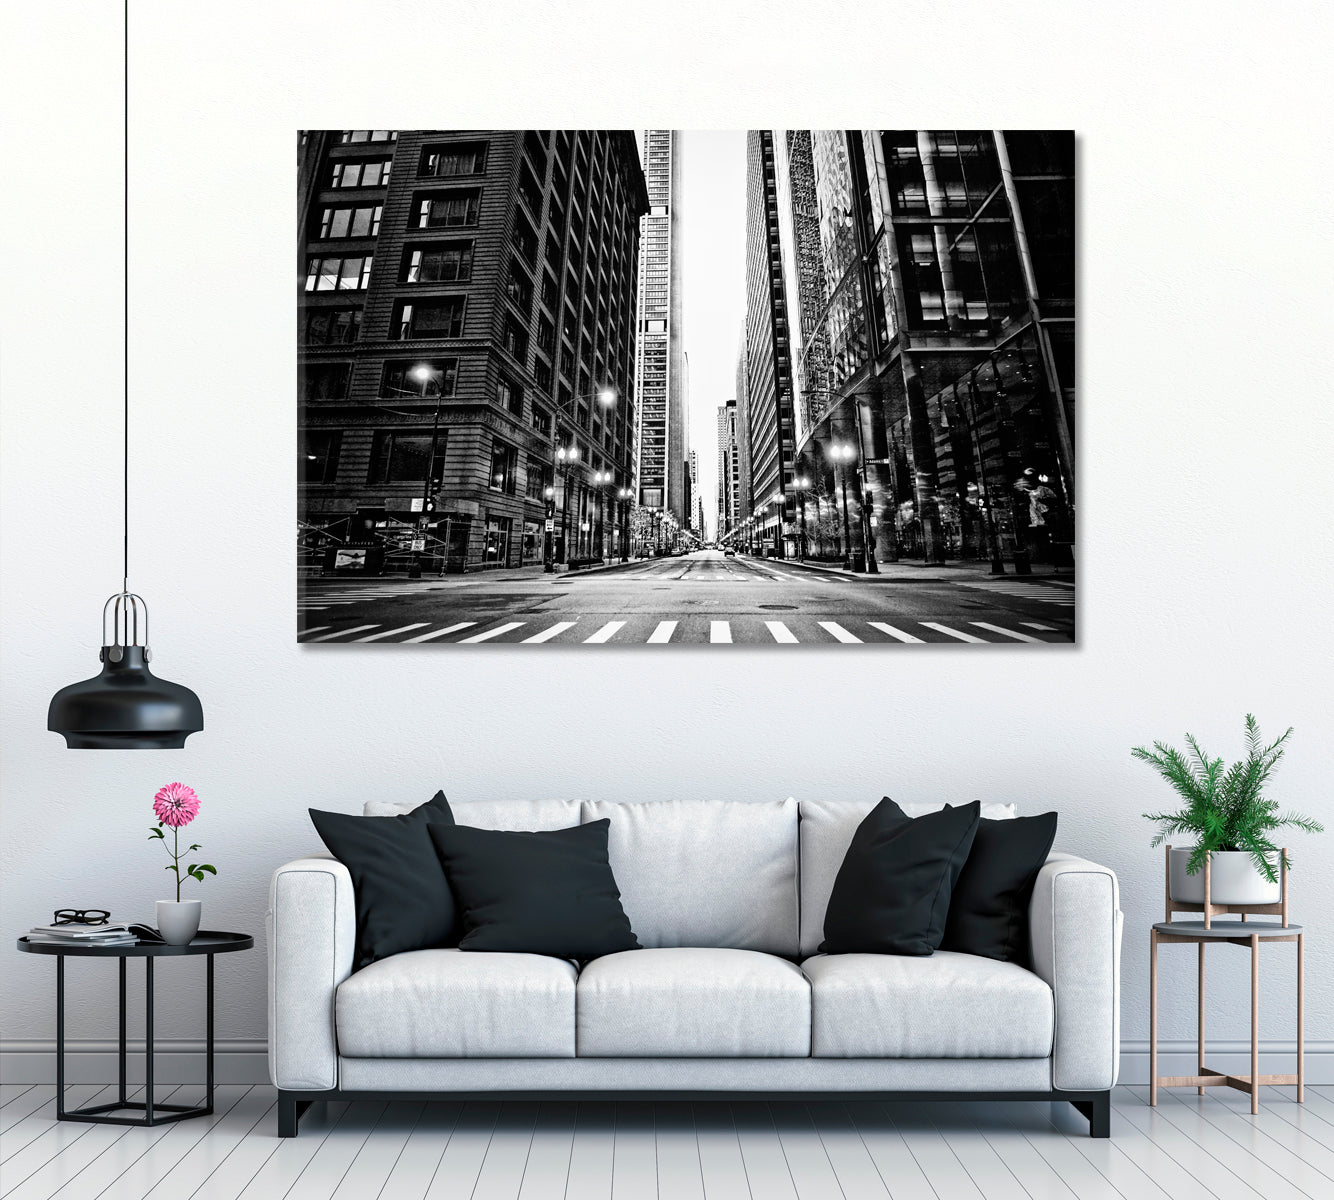 Chicago Street in Black and White Canvas Print ArtLexy 1 Panel 24"x16" inches 